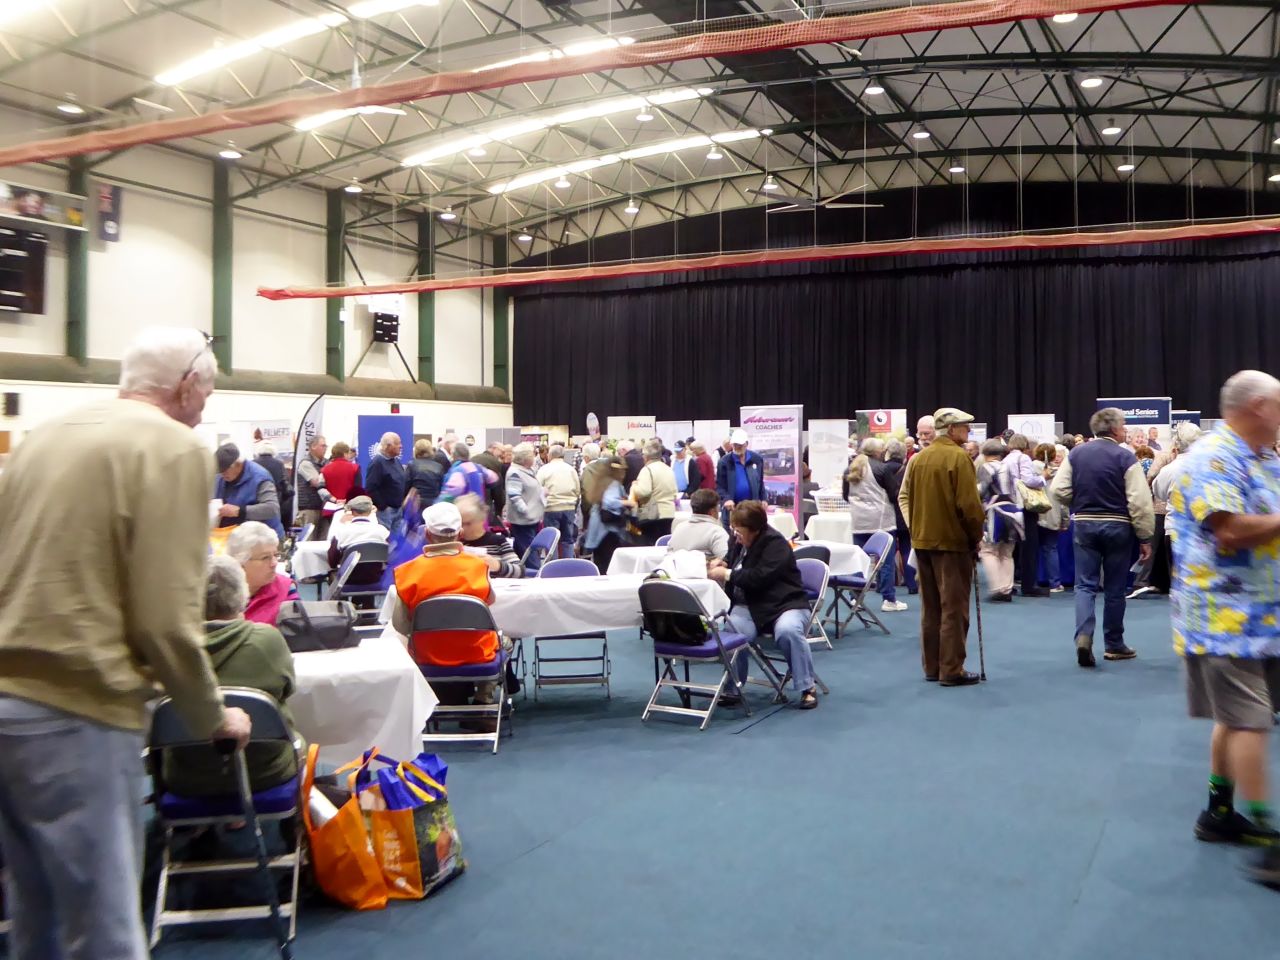 2,000 visitors viewed the 108 stalls at the Seniors Expo on August 22 in the Clive Berghofer Recreation Centre, Toowoomba.